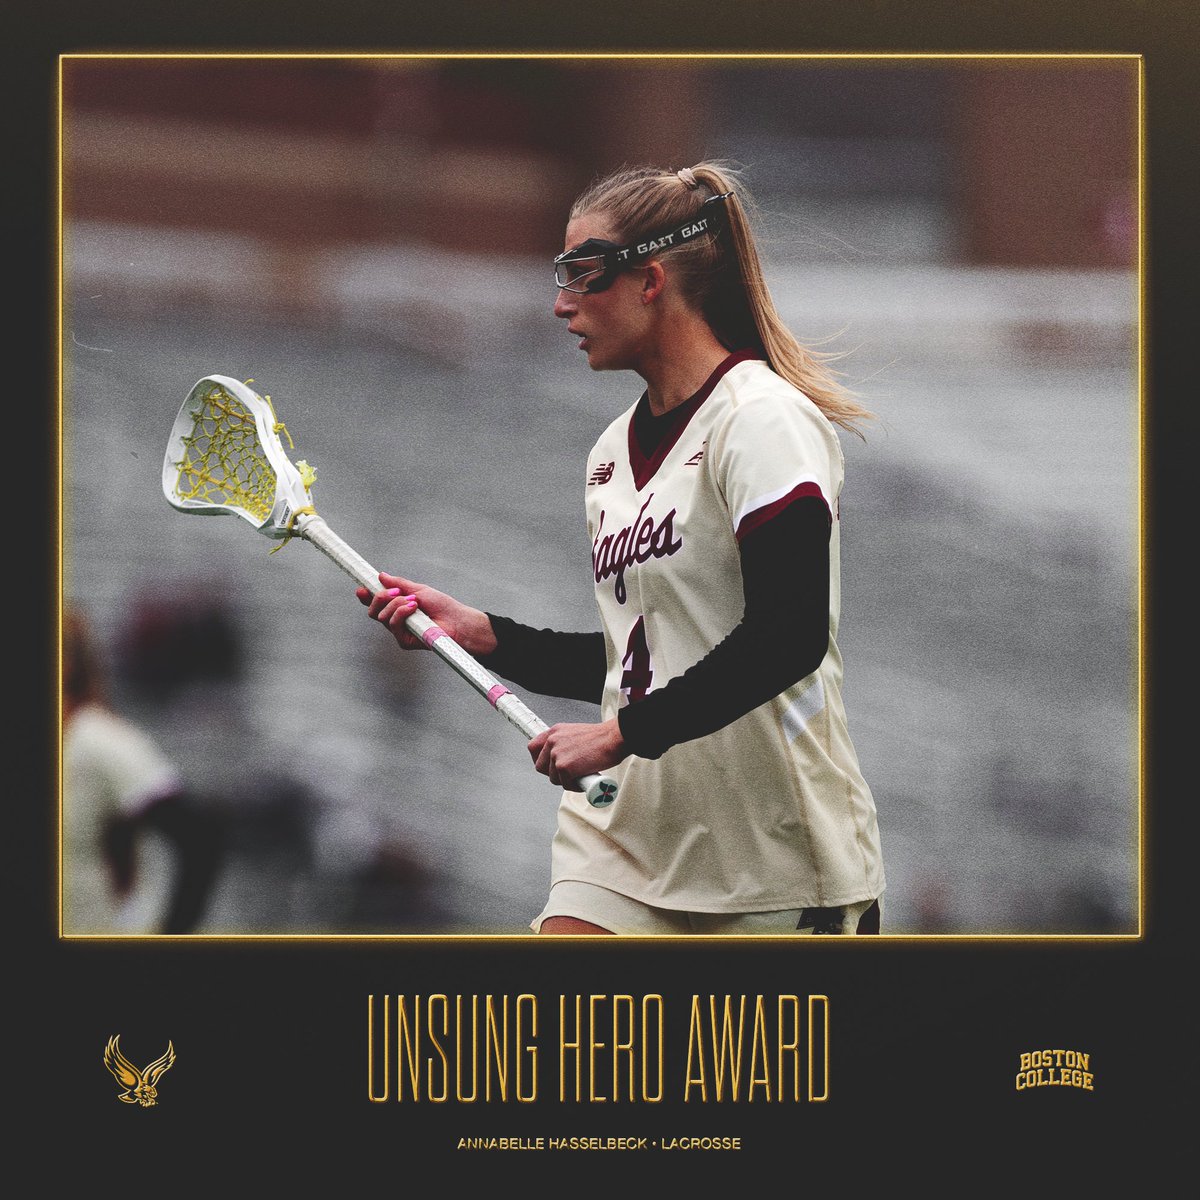 The 'Unsung Hero Award' goes to (drum roll) ... Annabelle Hasselbeck!